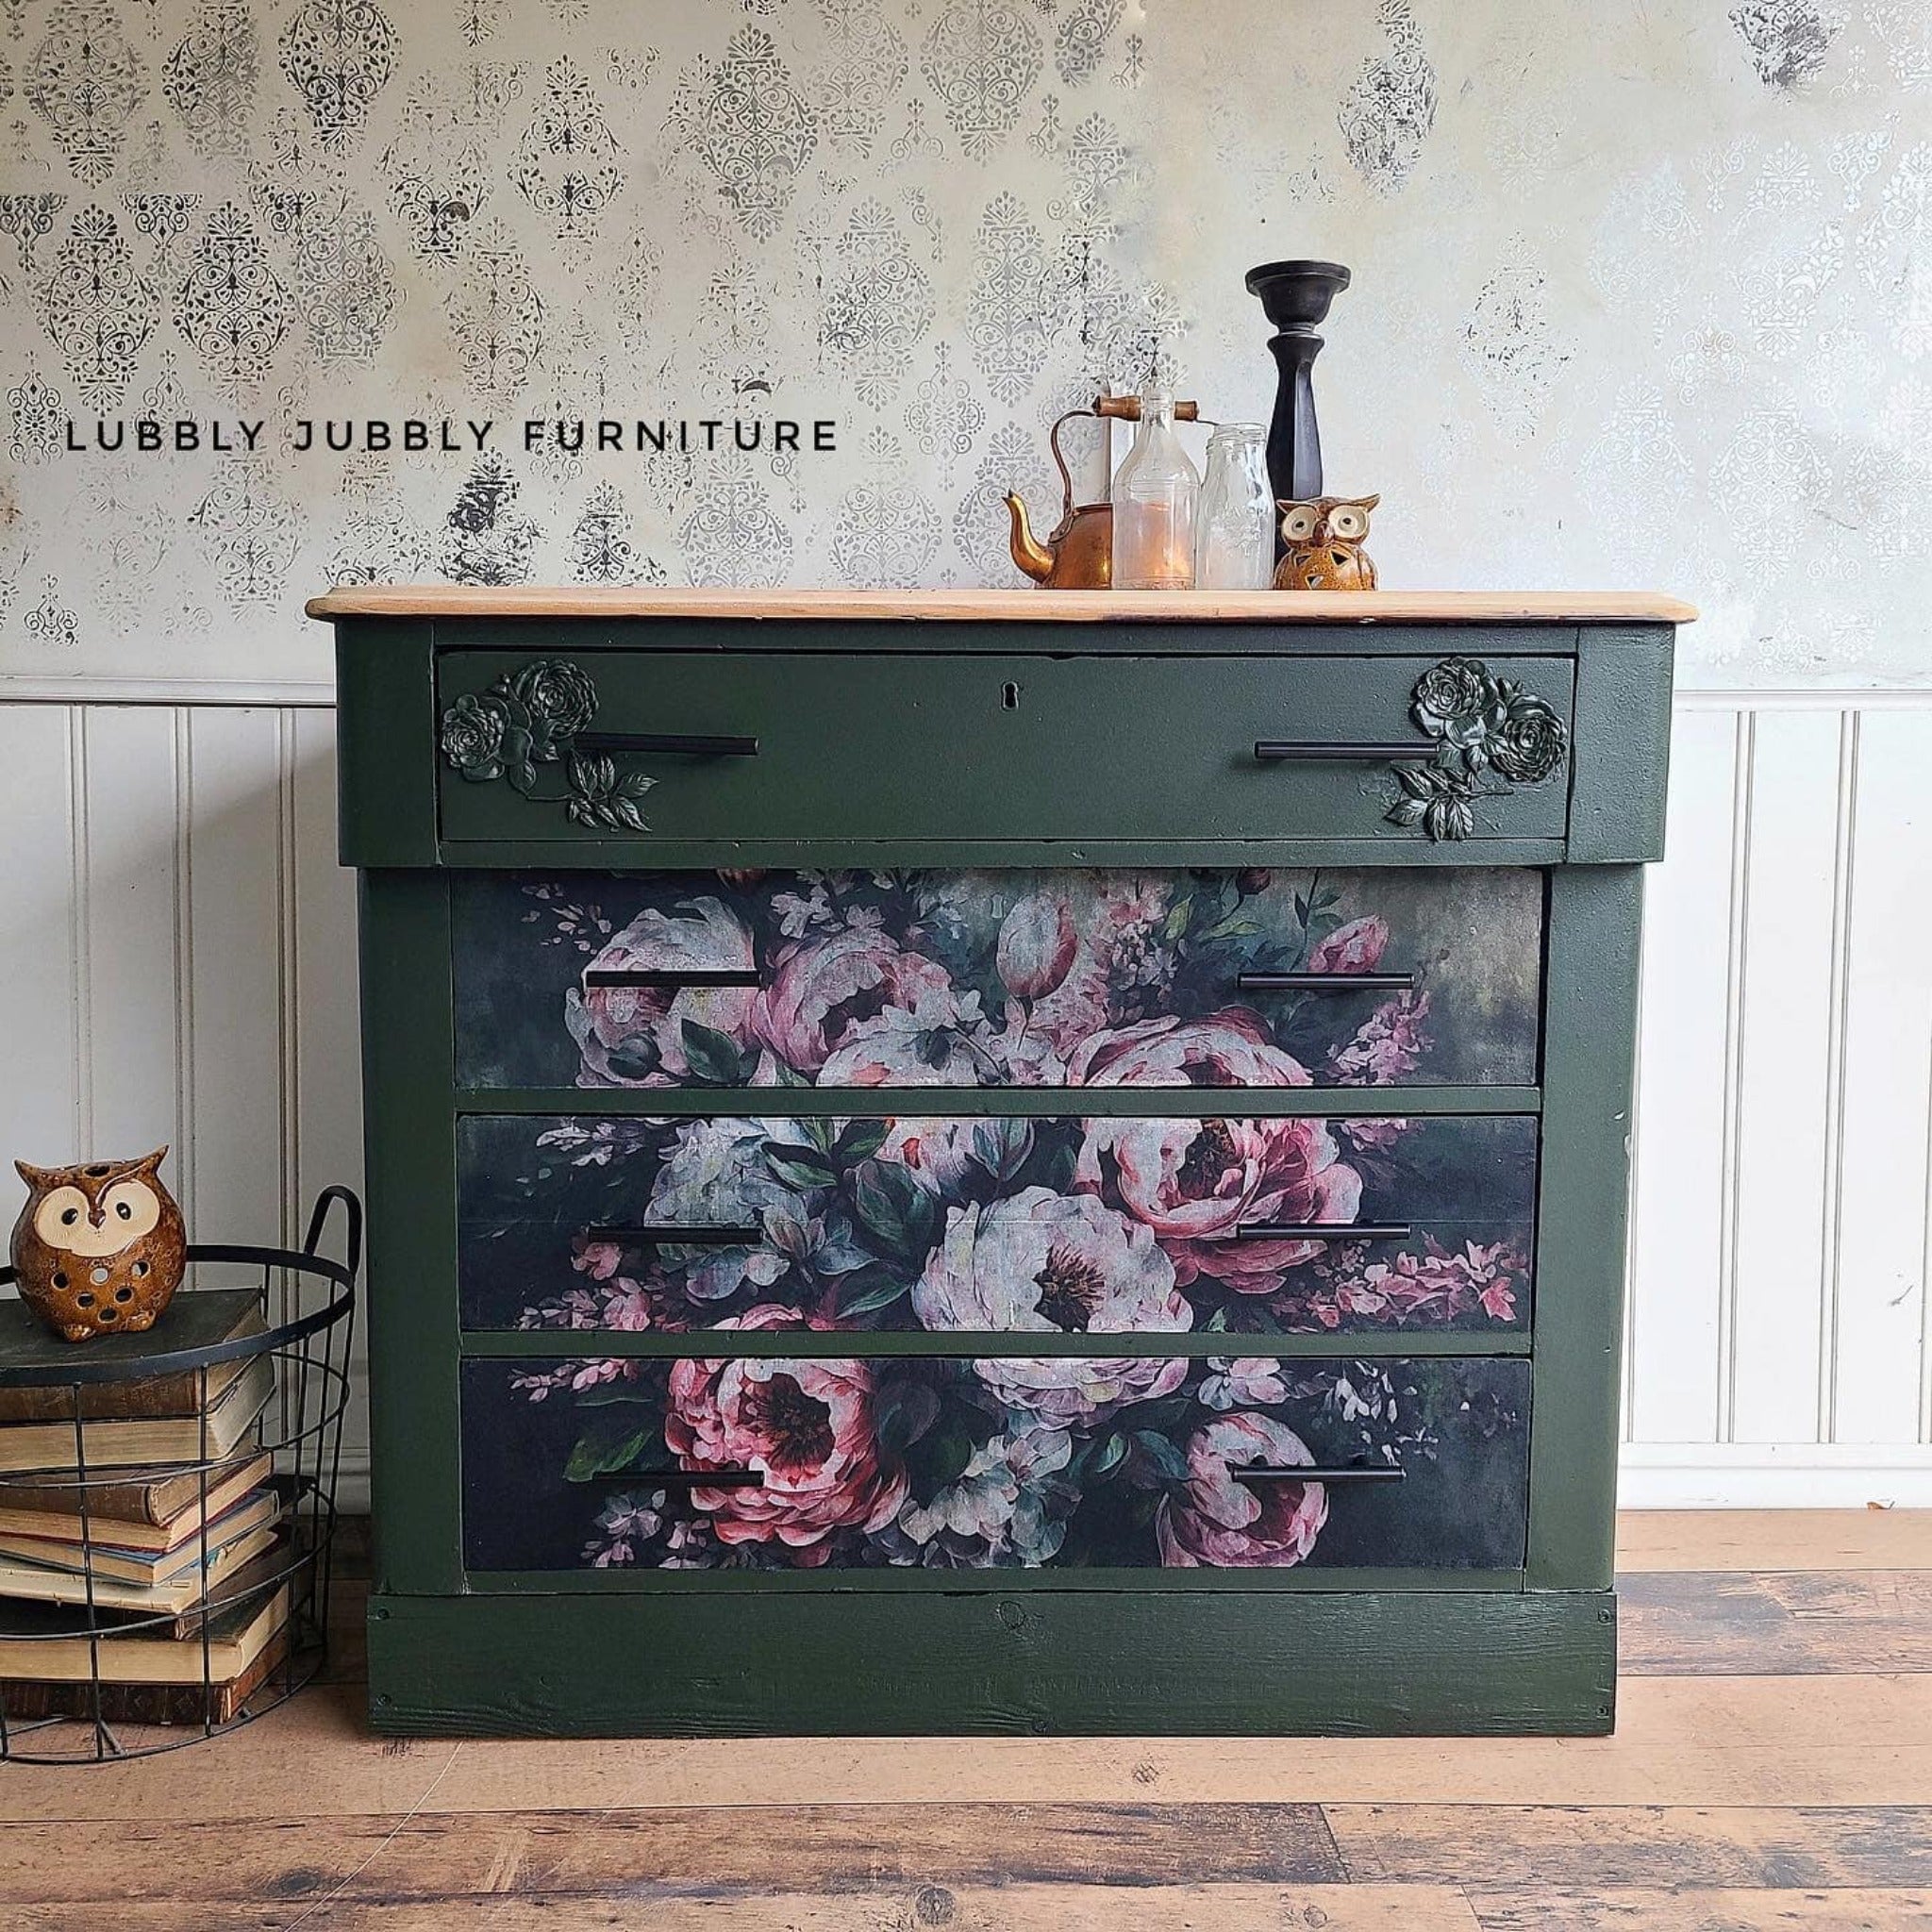 A vintage 4-drawer dresser refurbished by Lubby Jubbly Furniture is painted a dark pine green and features ReDesign with Prima's Mossy Rose Delight A1 fiber paper on its bottom 3 drawers.